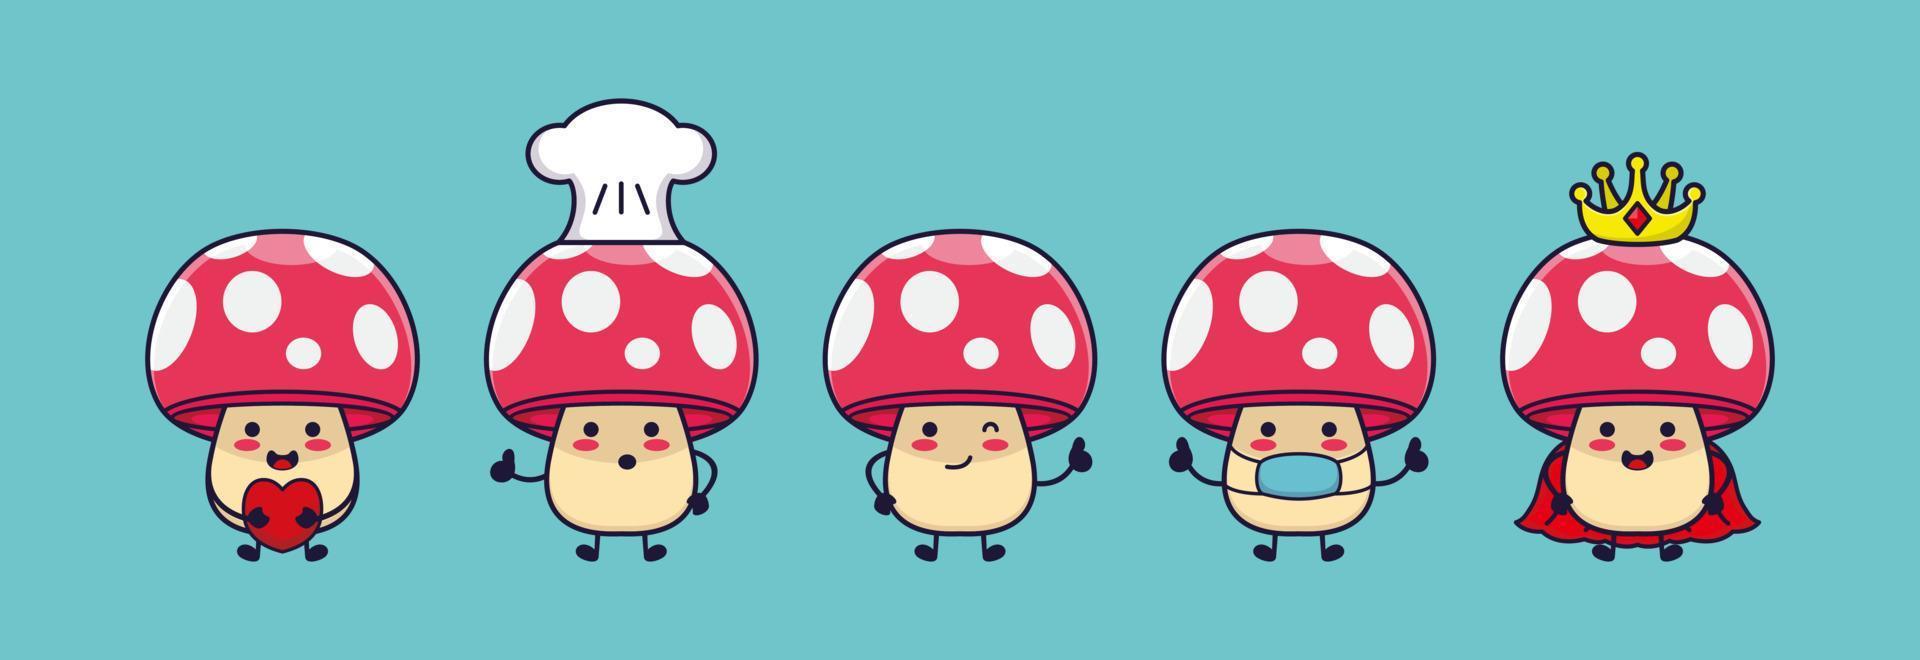 Cute funny mushroom set collection design. A Mascot Of the red mushroom isolated vector illustration